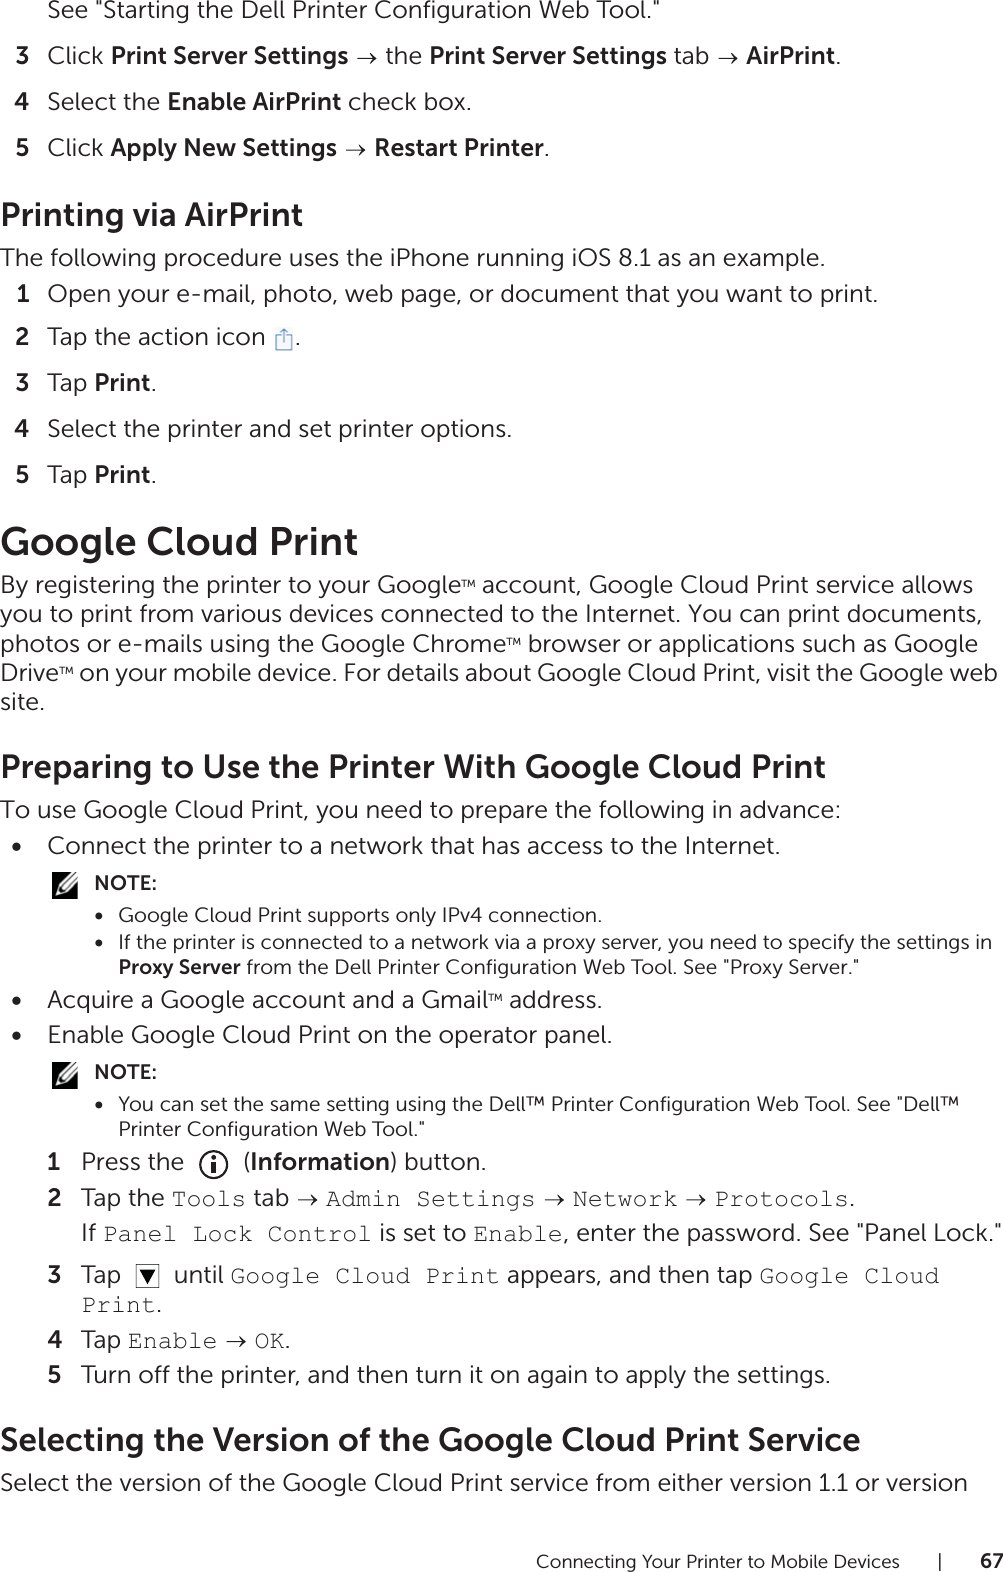 Connecting Your Printer to Mobile Devices |67See &quot;Starting the Dell Printer Configuration Web Tool.&quot;3Click Print Server Settings  the Print Server Settings tab   AirPrint.4Select the Enable AirPrint check box.5Click Apply New Settings  Restart Printer.Printing via AirPrintThe following procedure uses the iPhone running iOS 8.1 as an example.1Open your e-mail, photo, web page, or document that you want to print.2Tap the action icon  .3Tap Print.4Select the printer and set printer options.5Tap Print.Google Cloud PrintBy registering the printer to your GoogleTM account, Google Cloud Print service allows you to print from various devices connected to the Internet. You can print documents, photos or e-mails using the Google ChromeTM browser or applications such as Google DriveTM on your mobile device. For details about Google Cloud Print, visit the Google web site.Preparing to Use the Printer With Google Cloud PrintTo use Google Cloud Print, you need to prepare the following in advance:•Connect the printer to a network that has access to the Internet.NOTE:•Google Cloud Print supports only IPv4 connection.•If the printer is connected to a network via a proxy server, you need to specify the settings in Proxy Server from the Dell Printer Configuration Web Tool. See &quot;Proxy Server.&quot;•Acquire a Google account and a GmailTM address.•Enable Google Cloud Print on the operator panel.NOTE:•You can set the same setting using the Dell™ Printer Configuration Web Tool. See &quot;Dell™ Printer Configuration Web Tool.&quot;1Press the   (Information) button.2Tap the Tools tab   Admin Settings  Network  Protocols.If Panel Lock Control is set to Enable, enter the password. See &quot;Panel Lock.&quot;3Tap  until Google Cloud Print appears, and then tap Google Cloud Print.4Tap Enable  OK.5Turn off the printer, and then turn it on again to apply the settings.Selecting the Version of the Google Cloud Print ServiceSelect the version of the Google Cloud Print service from either version 1.1 or version 